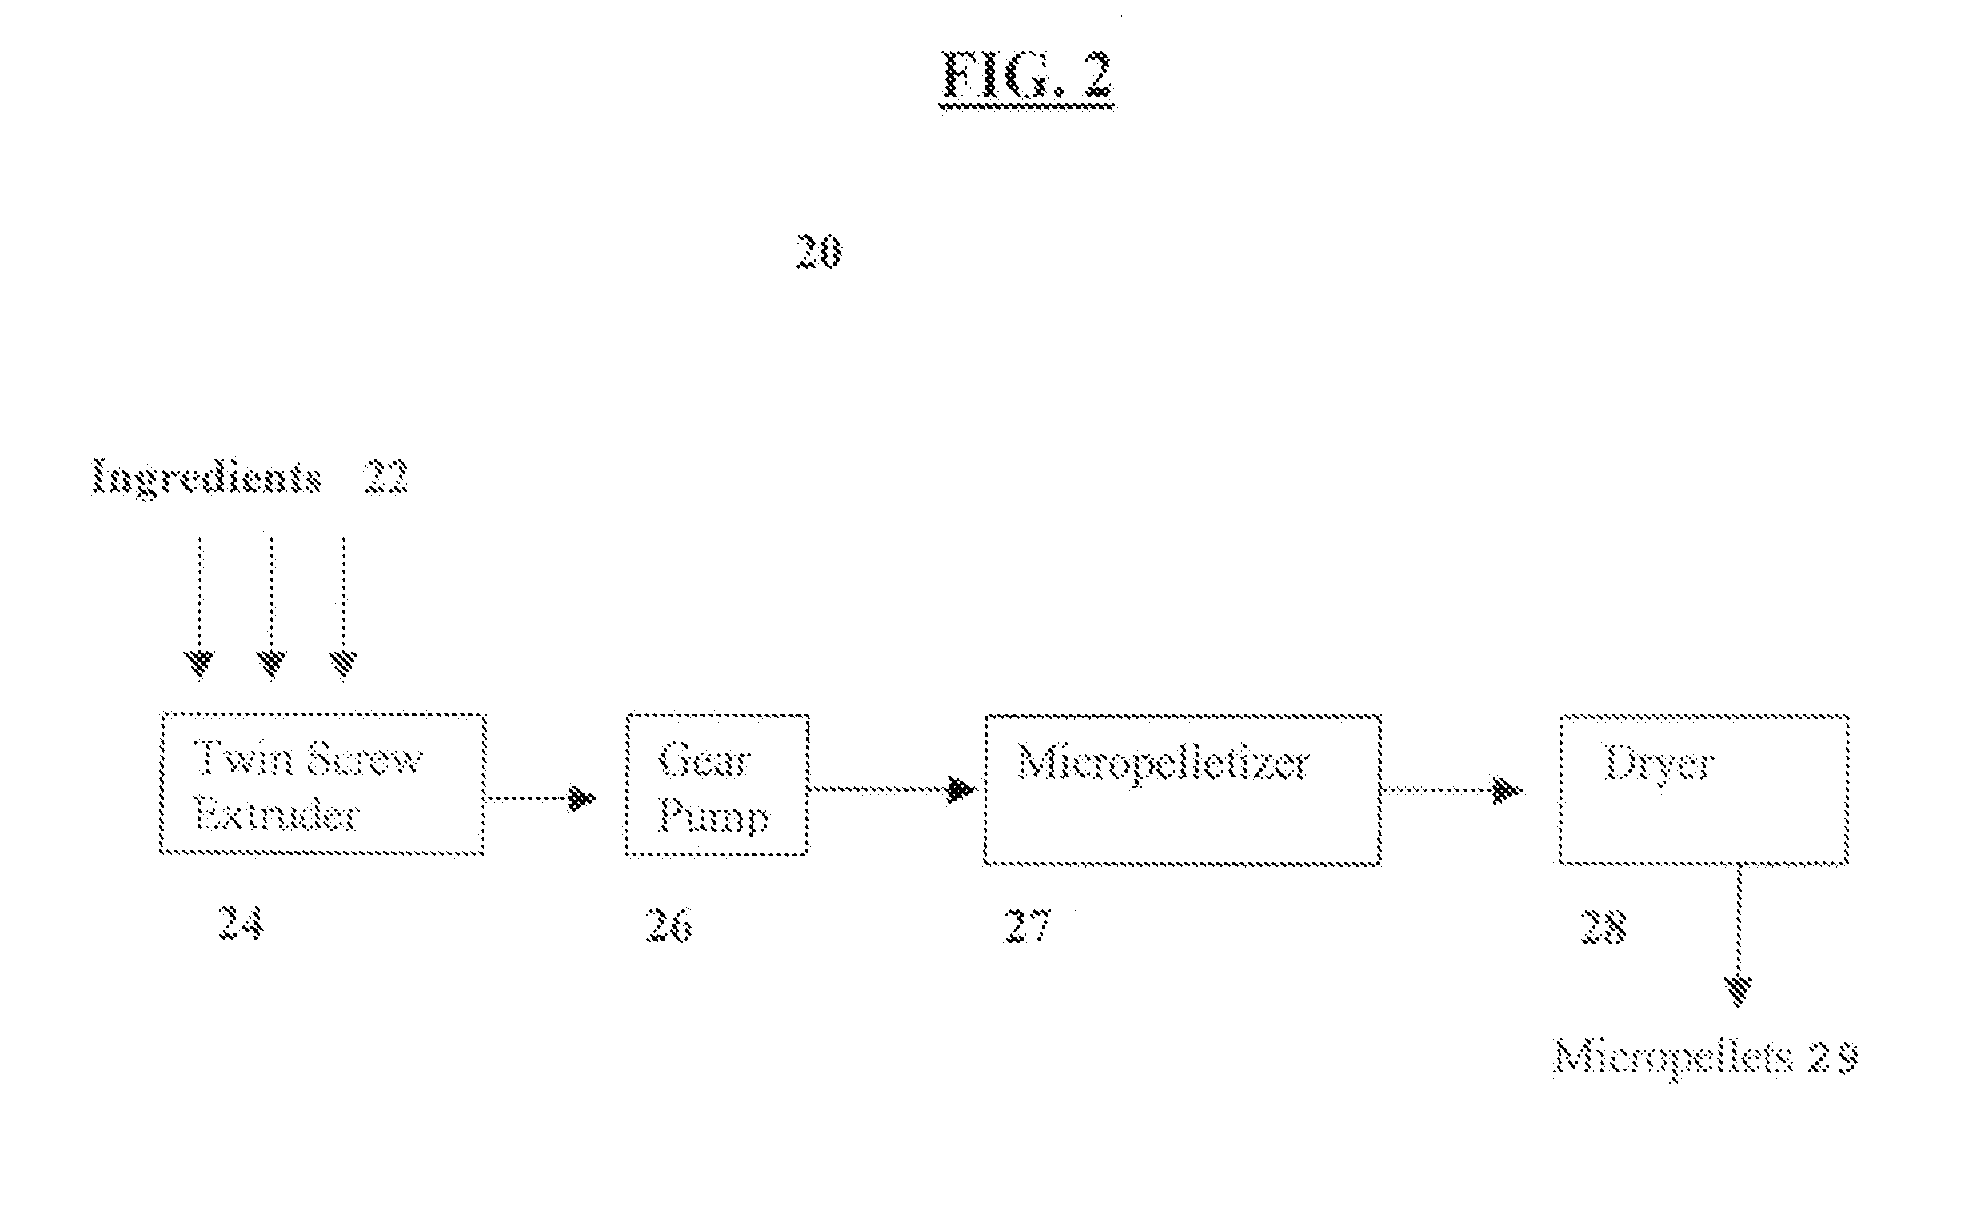 Thermoplastic polyolefin compositions having improved melt viscosity and methods of making the same